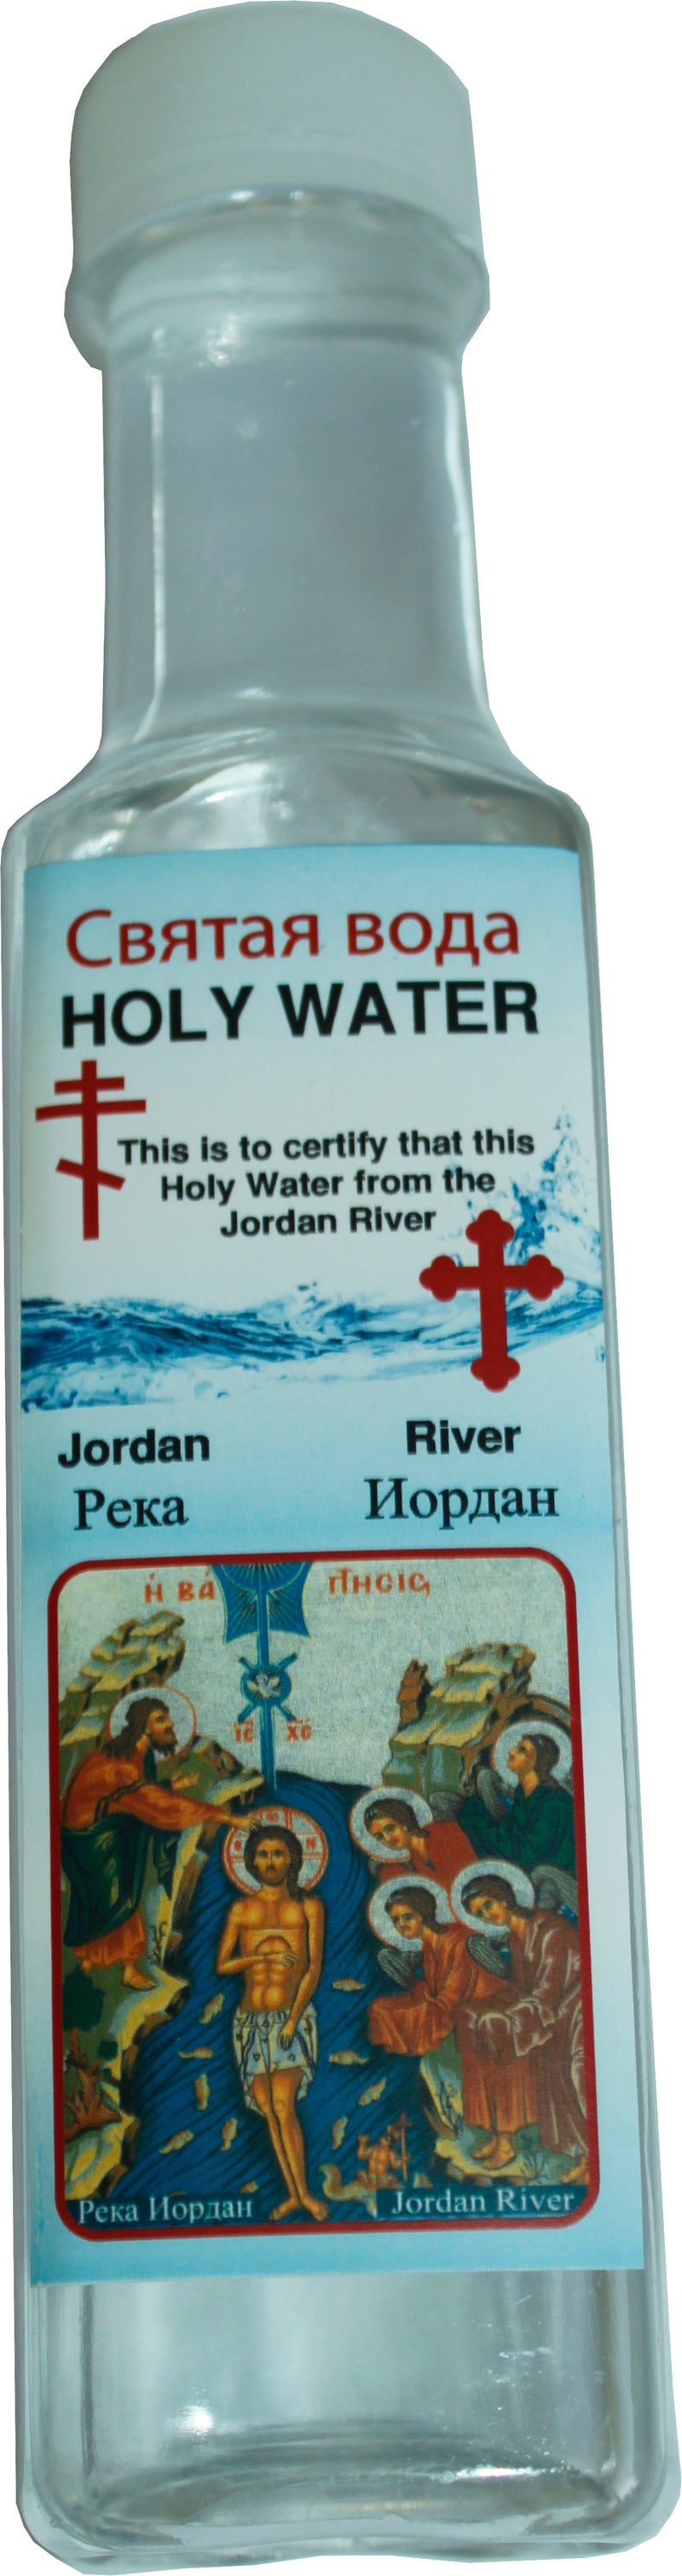 Holy Land Market Authentic Jordan River Baptism of Our Lord Water in Decorative Box